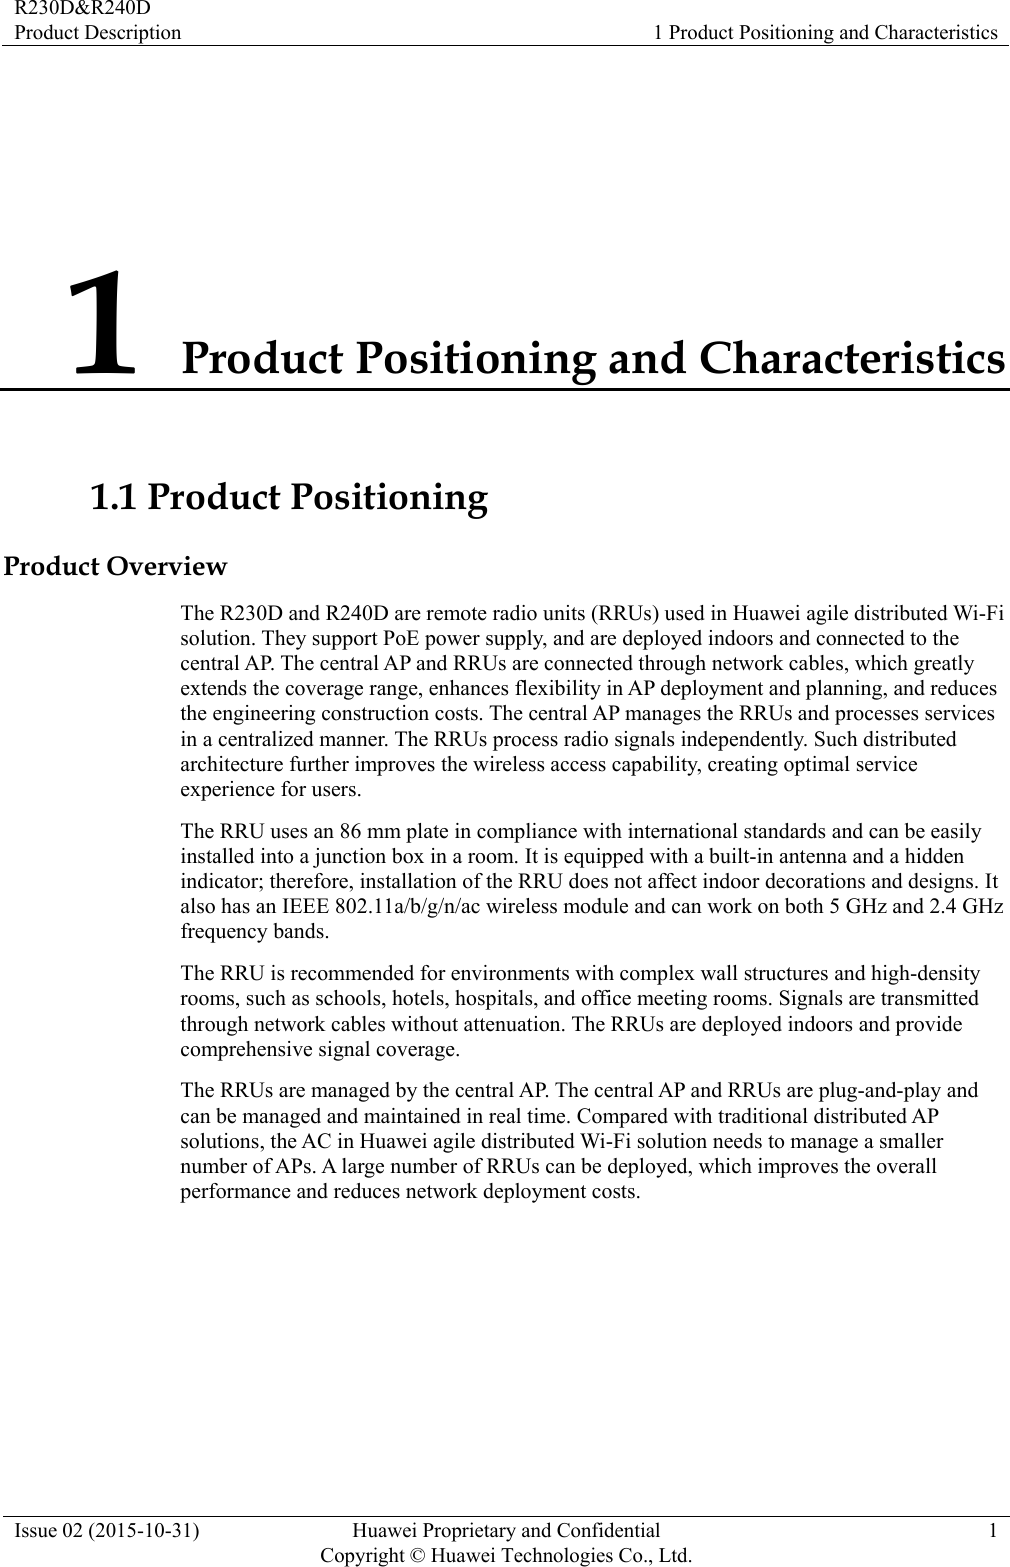 R230D&amp;R240D Product Description  1 Product Positioning and Characteristics Issue 02 (2015-10-31)  Huawei Proprietary and Confidential         Copyright © Huawei Technologies Co., Ltd.1 1 Product Positioning and Characteristics 1.1 Product Positioning Product Overview The R230D and R240D are remote radio units (RRUs) used in Huawei agile distributed Wi-Fi solution. They support PoE power supply, and are deployed indoors and connected to the central AP. The central AP and RRUs are connected through network cables, which greatly extends the coverage range, enhances flexibility in AP deployment and planning, and reduces the engineering construction costs. The central AP manages the RRUs and processes services in a centralized manner. The RRUs process radio signals independently. Such distributed architecture further improves the wireless access capability, creating optimal service experience for users. The RRU uses an 86 mm plate in compliance with international standards and can be easily installed into a junction box in a room. It is equipped with a built-in antenna and a hidden indicator; therefore, installation of the RRU does not affect indoor decorations and designs. It also has an IEEE 802.11a/b/g/n/ac wireless module and can work on both 5 GHz and 2.4 GHz frequency bands. The RRU is recommended for environments with complex wall structures and high-density rooms, such as schools, hotels, hospitals, and office meeting rooms. Signals are transmitted through network cables without attenuation. The RRUs are deployed indoors and provide comprehensive signal coverage. The RRUs are managed by the central AP. The central AP and RRUs are plug-and-play and can be managed and maintained in real time. Compared with traditional distributed AP solutions, the AC in Huawei agile distributed Wi-Fi solution needs to manage a smaller number of APs. A large number of RRUs can be deployed, which improves the overall performance and reduces network deployment costs. 